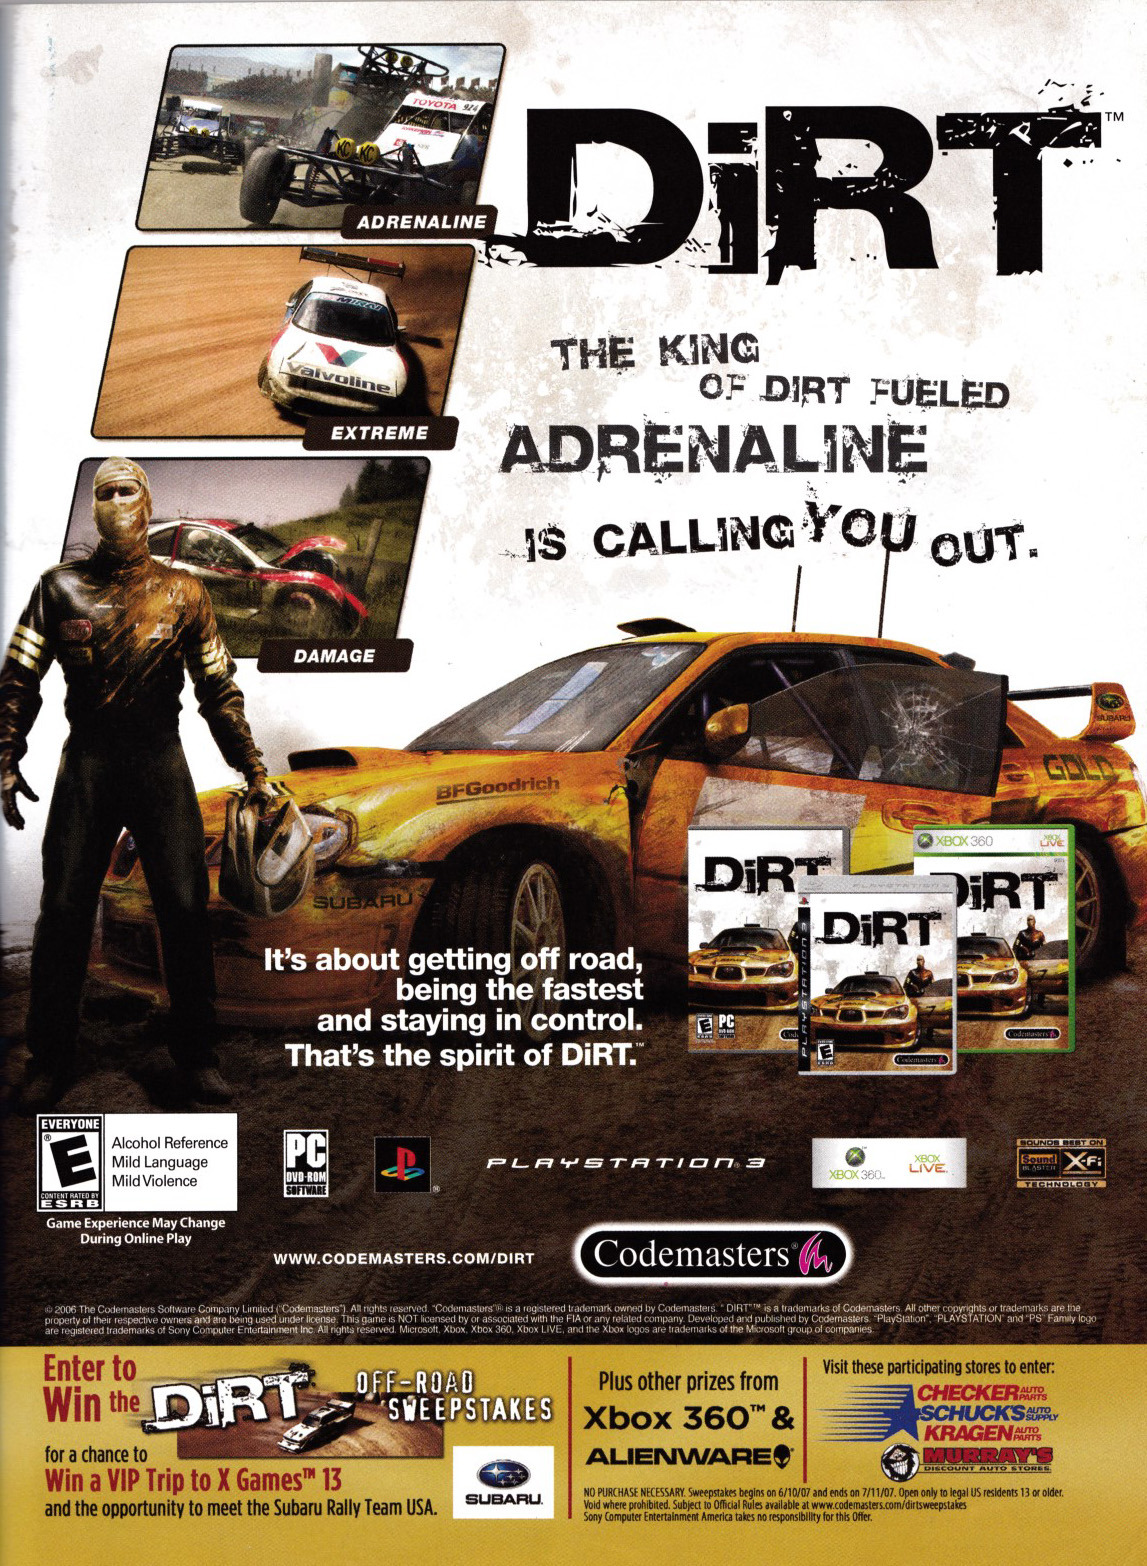 ‘Dirt’
[aka, ‘Colin McRae: Dirt’][PC / PS3 / X360] [USA] [MAGAZINE] [2007]
• Electronic Gaming Monthly, August 2007 (#218)
• via personal collection